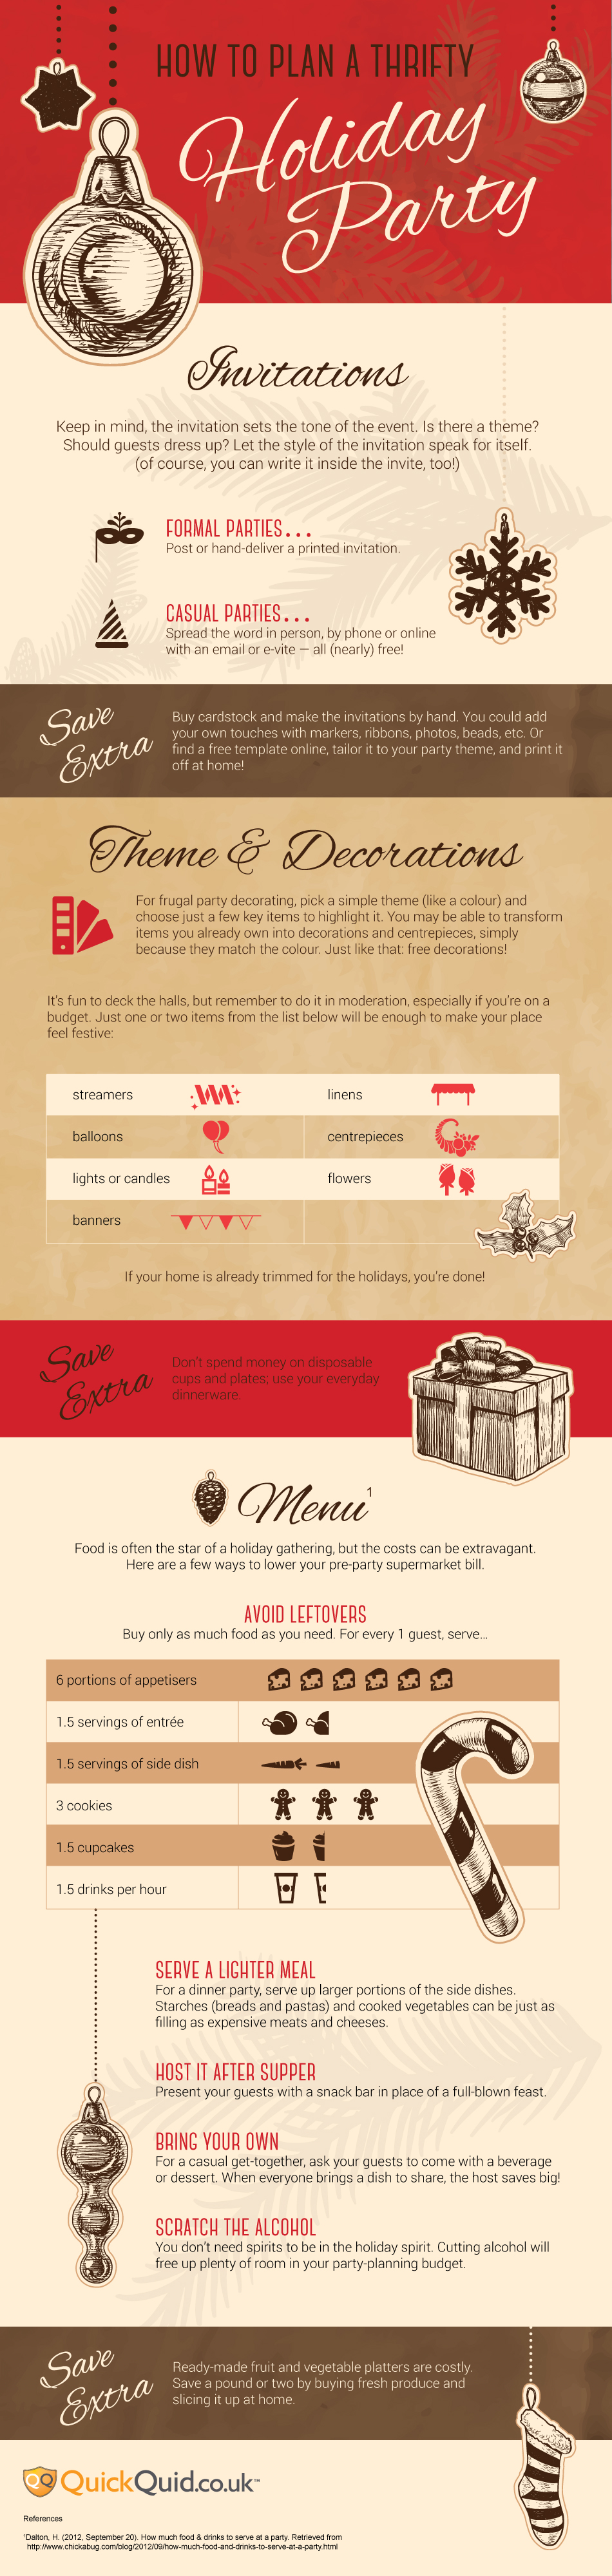 How to Plan a Thrifty Holiday Party